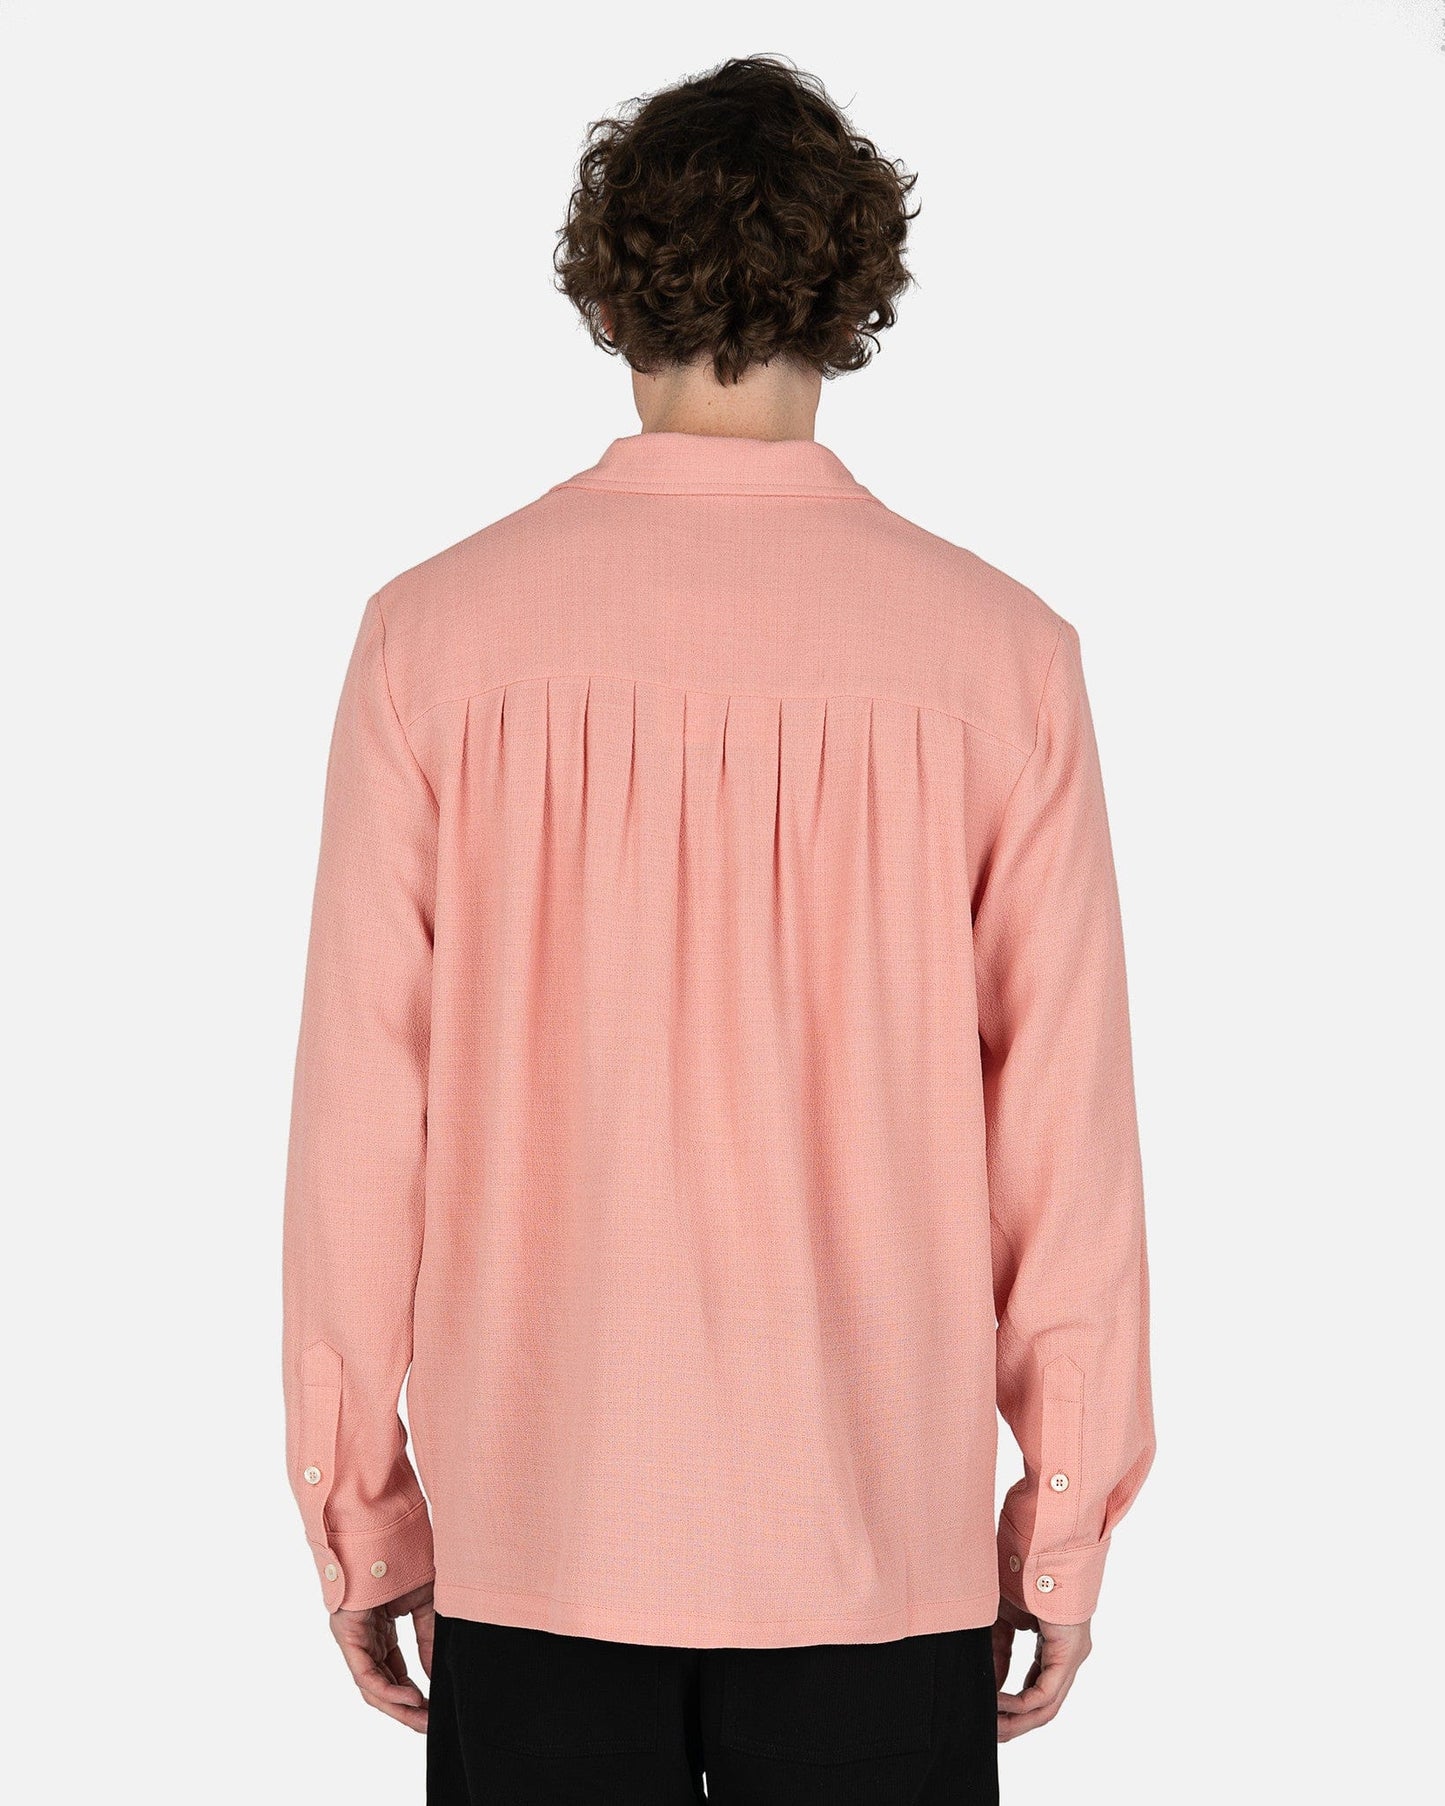 Séfr Men's Shirts Rampoua Shirt in Cold Pink